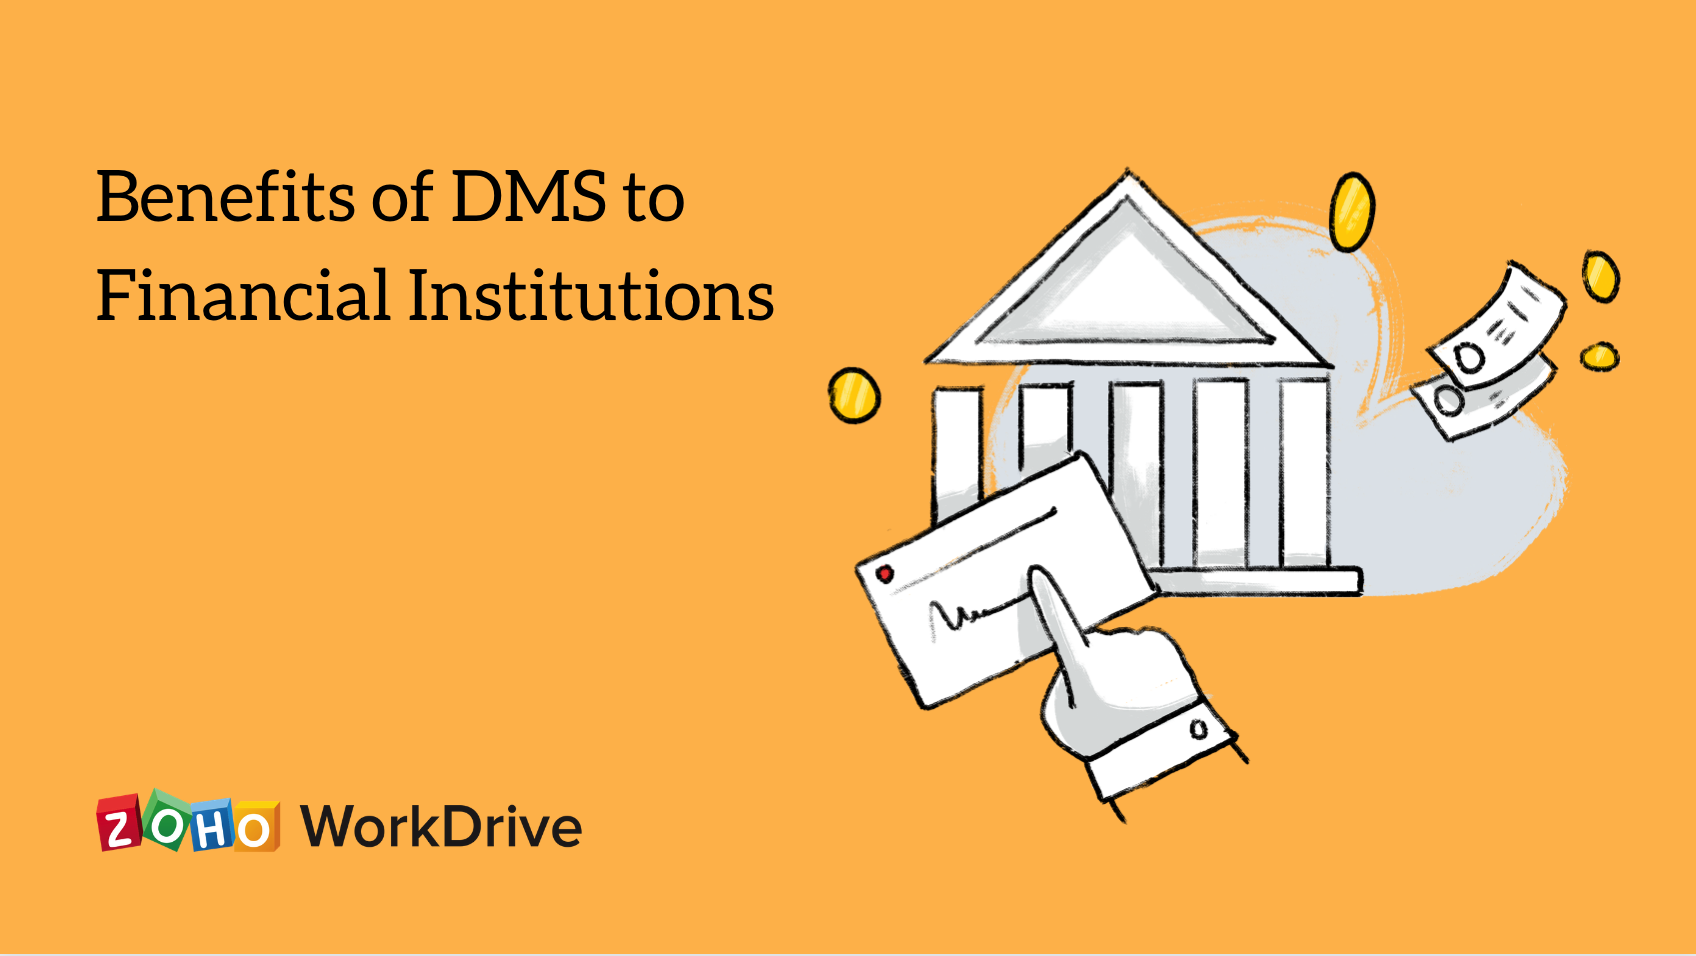 Benefits of DMS to Financial Institutions